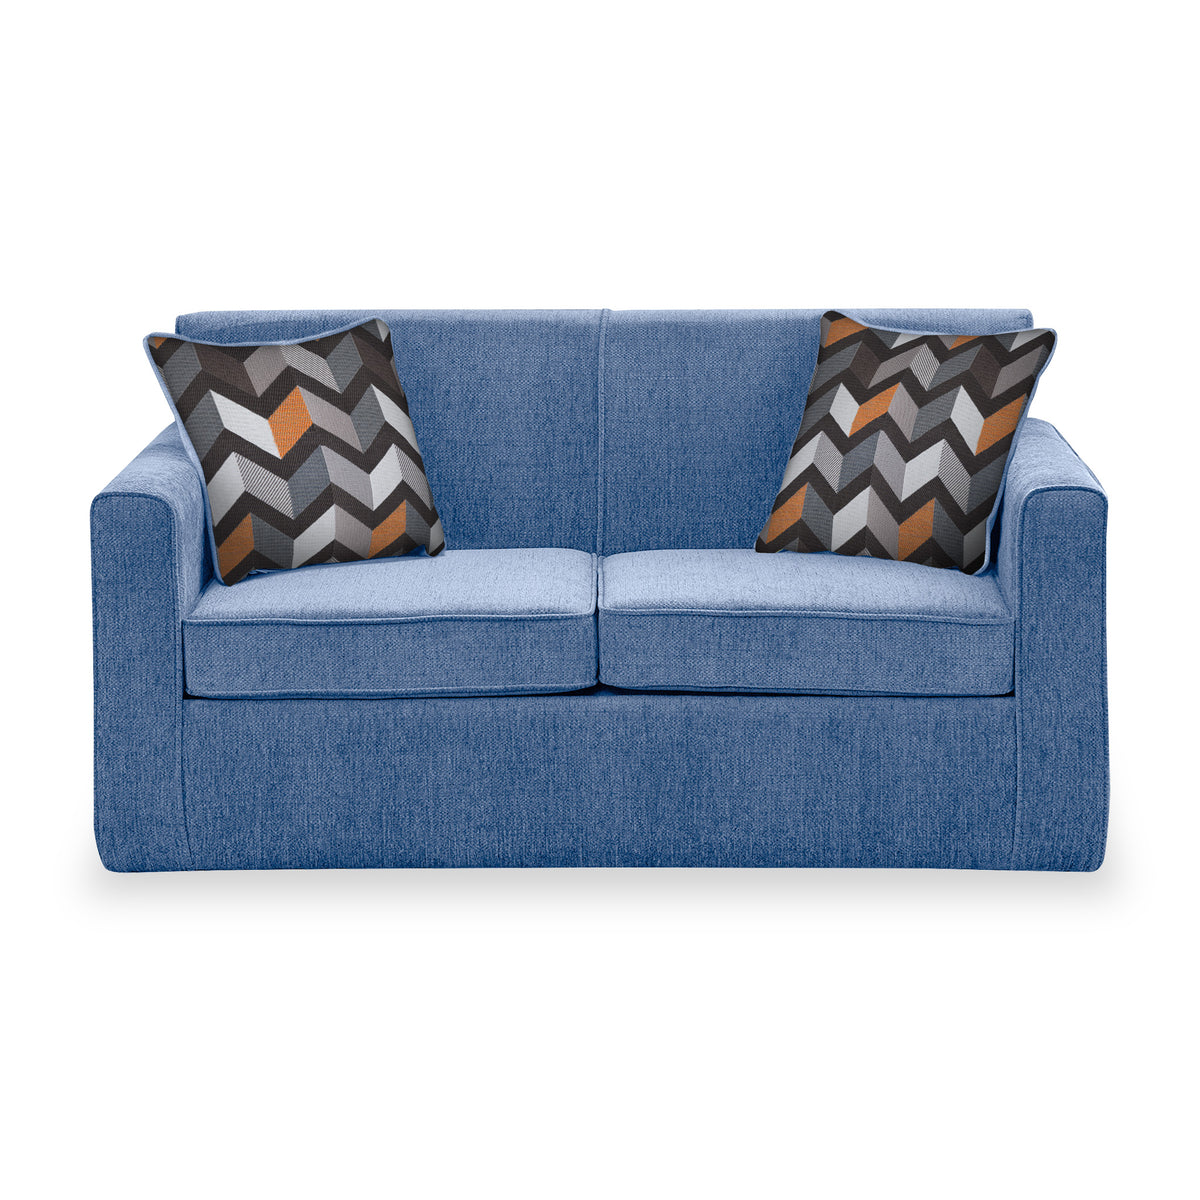 Bawtry Denim Faux Linen 2 Seater Sofabed with Charcoal Scatter Cushions from Roseland Furniture